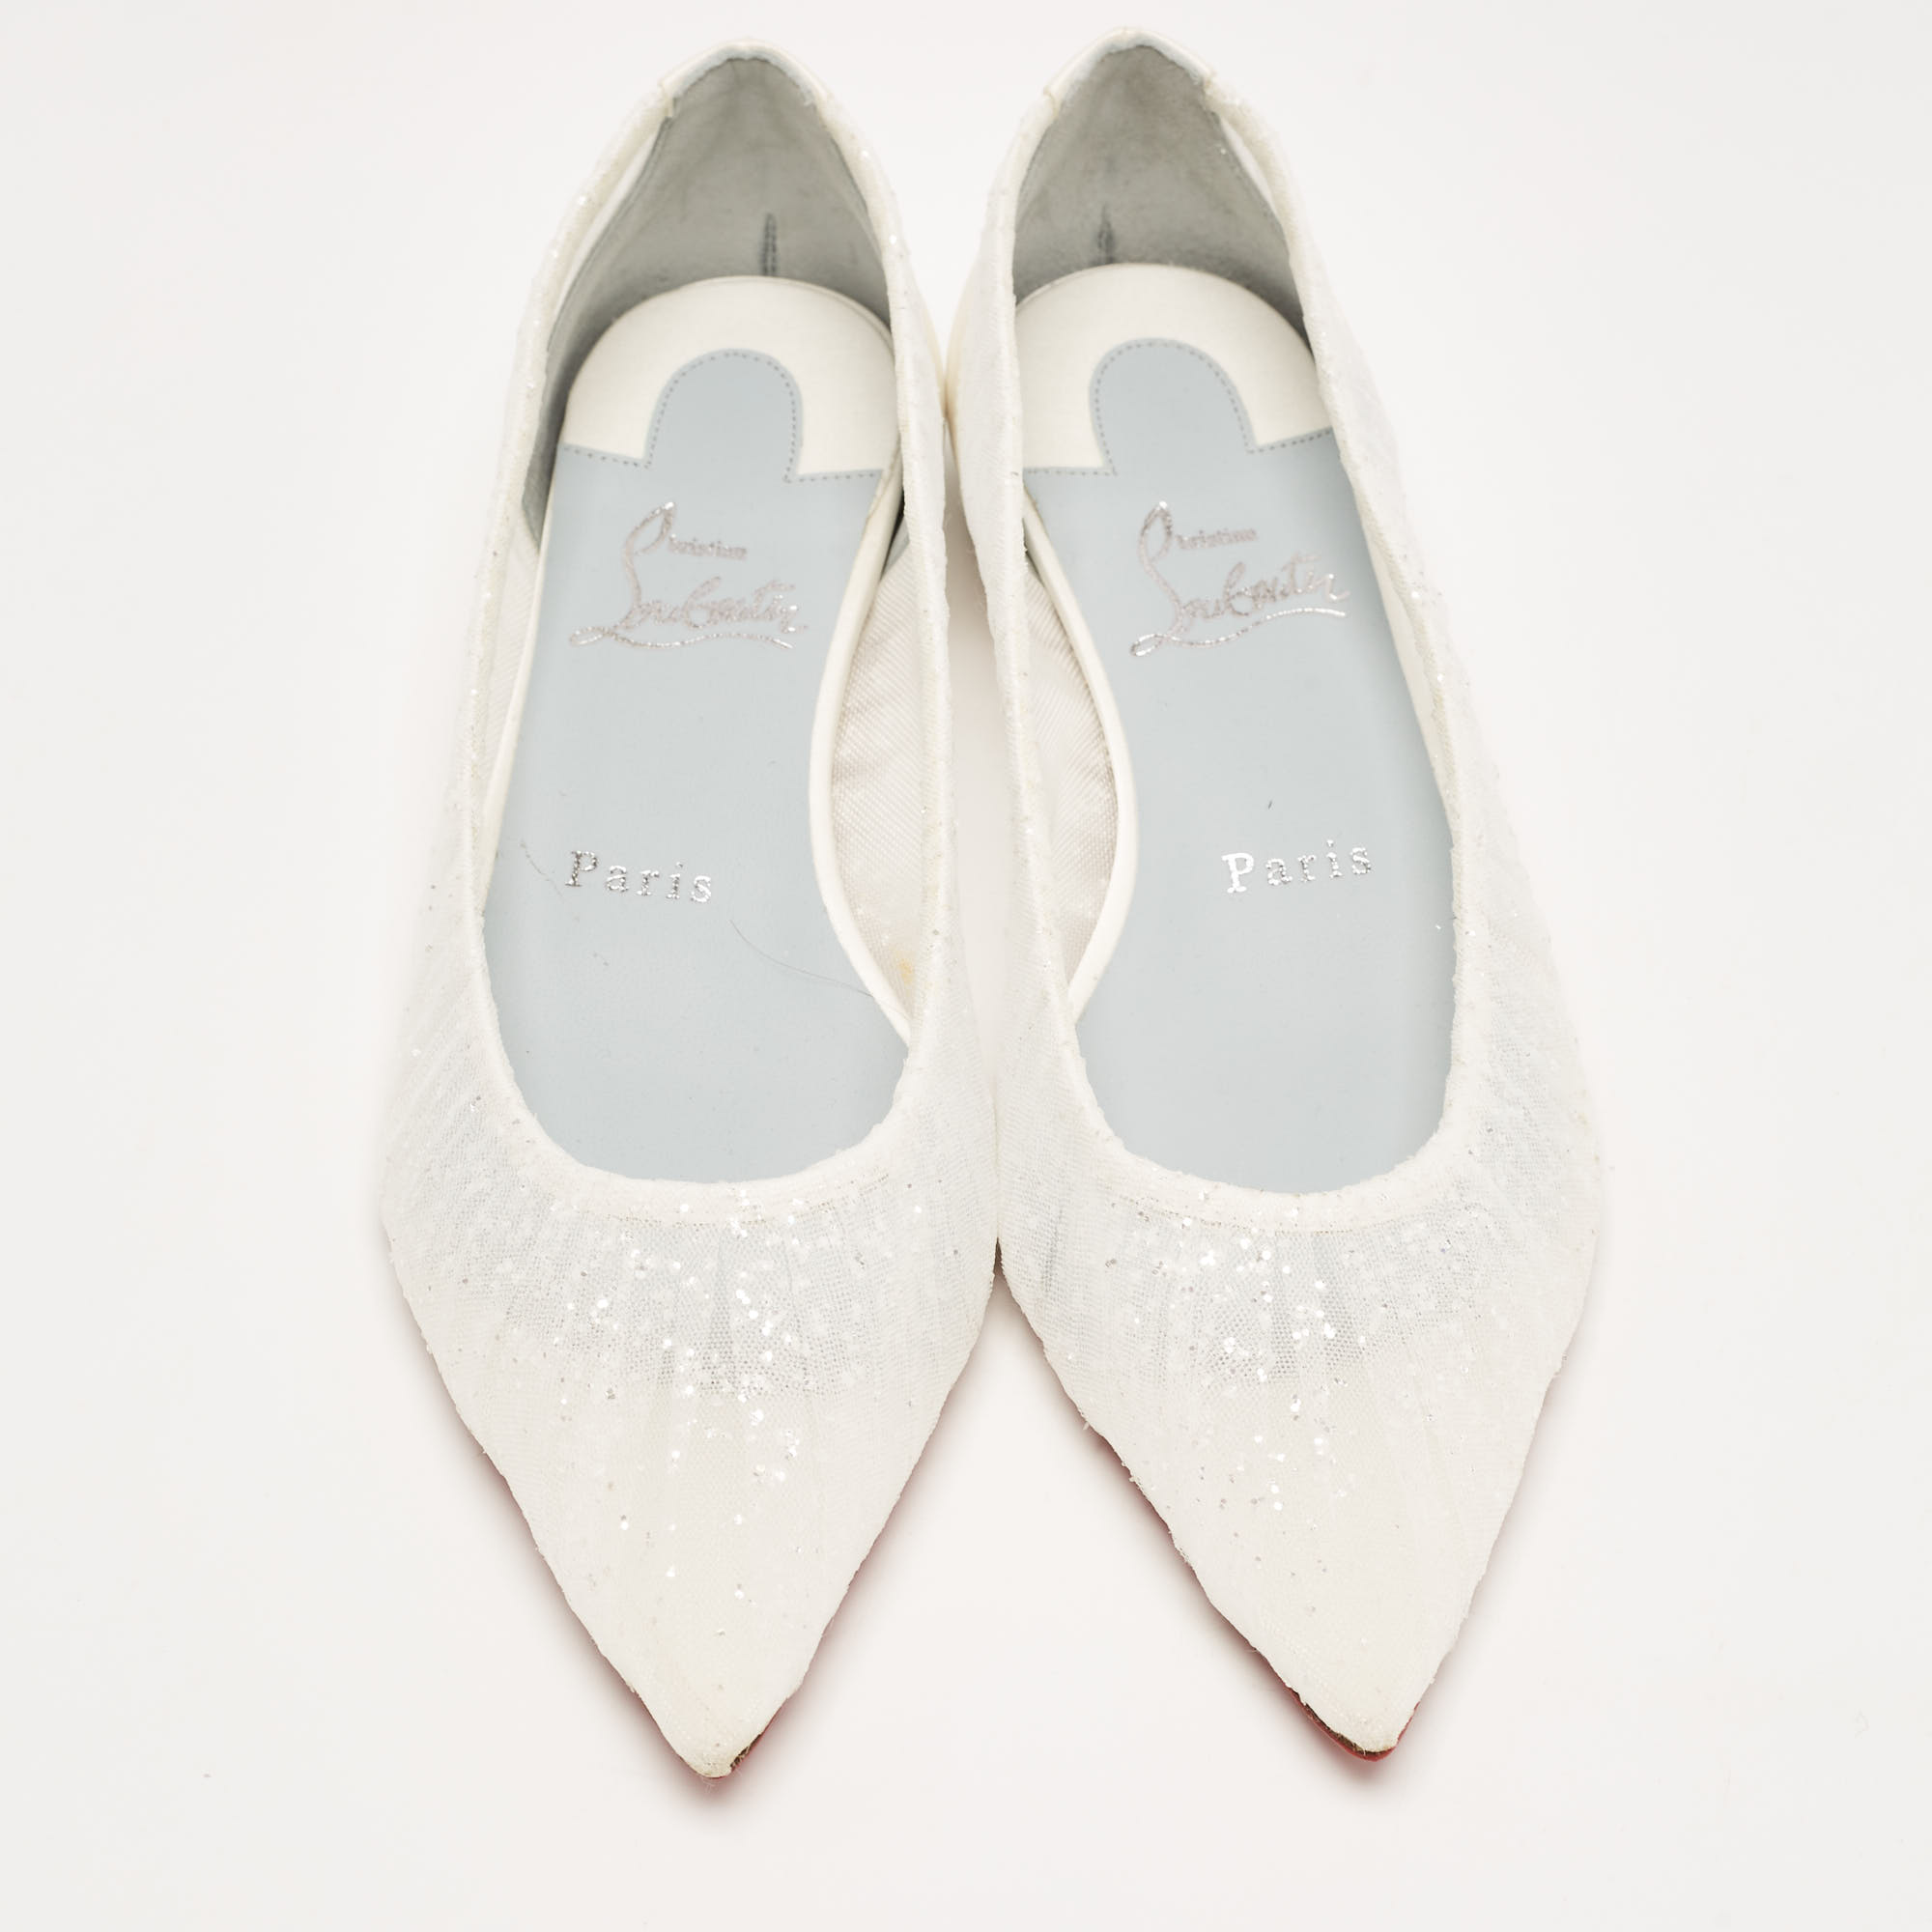 Christian Louboutin White Glitter Tulle Fabric And Satin Kate Ballet Flats Size 36.5